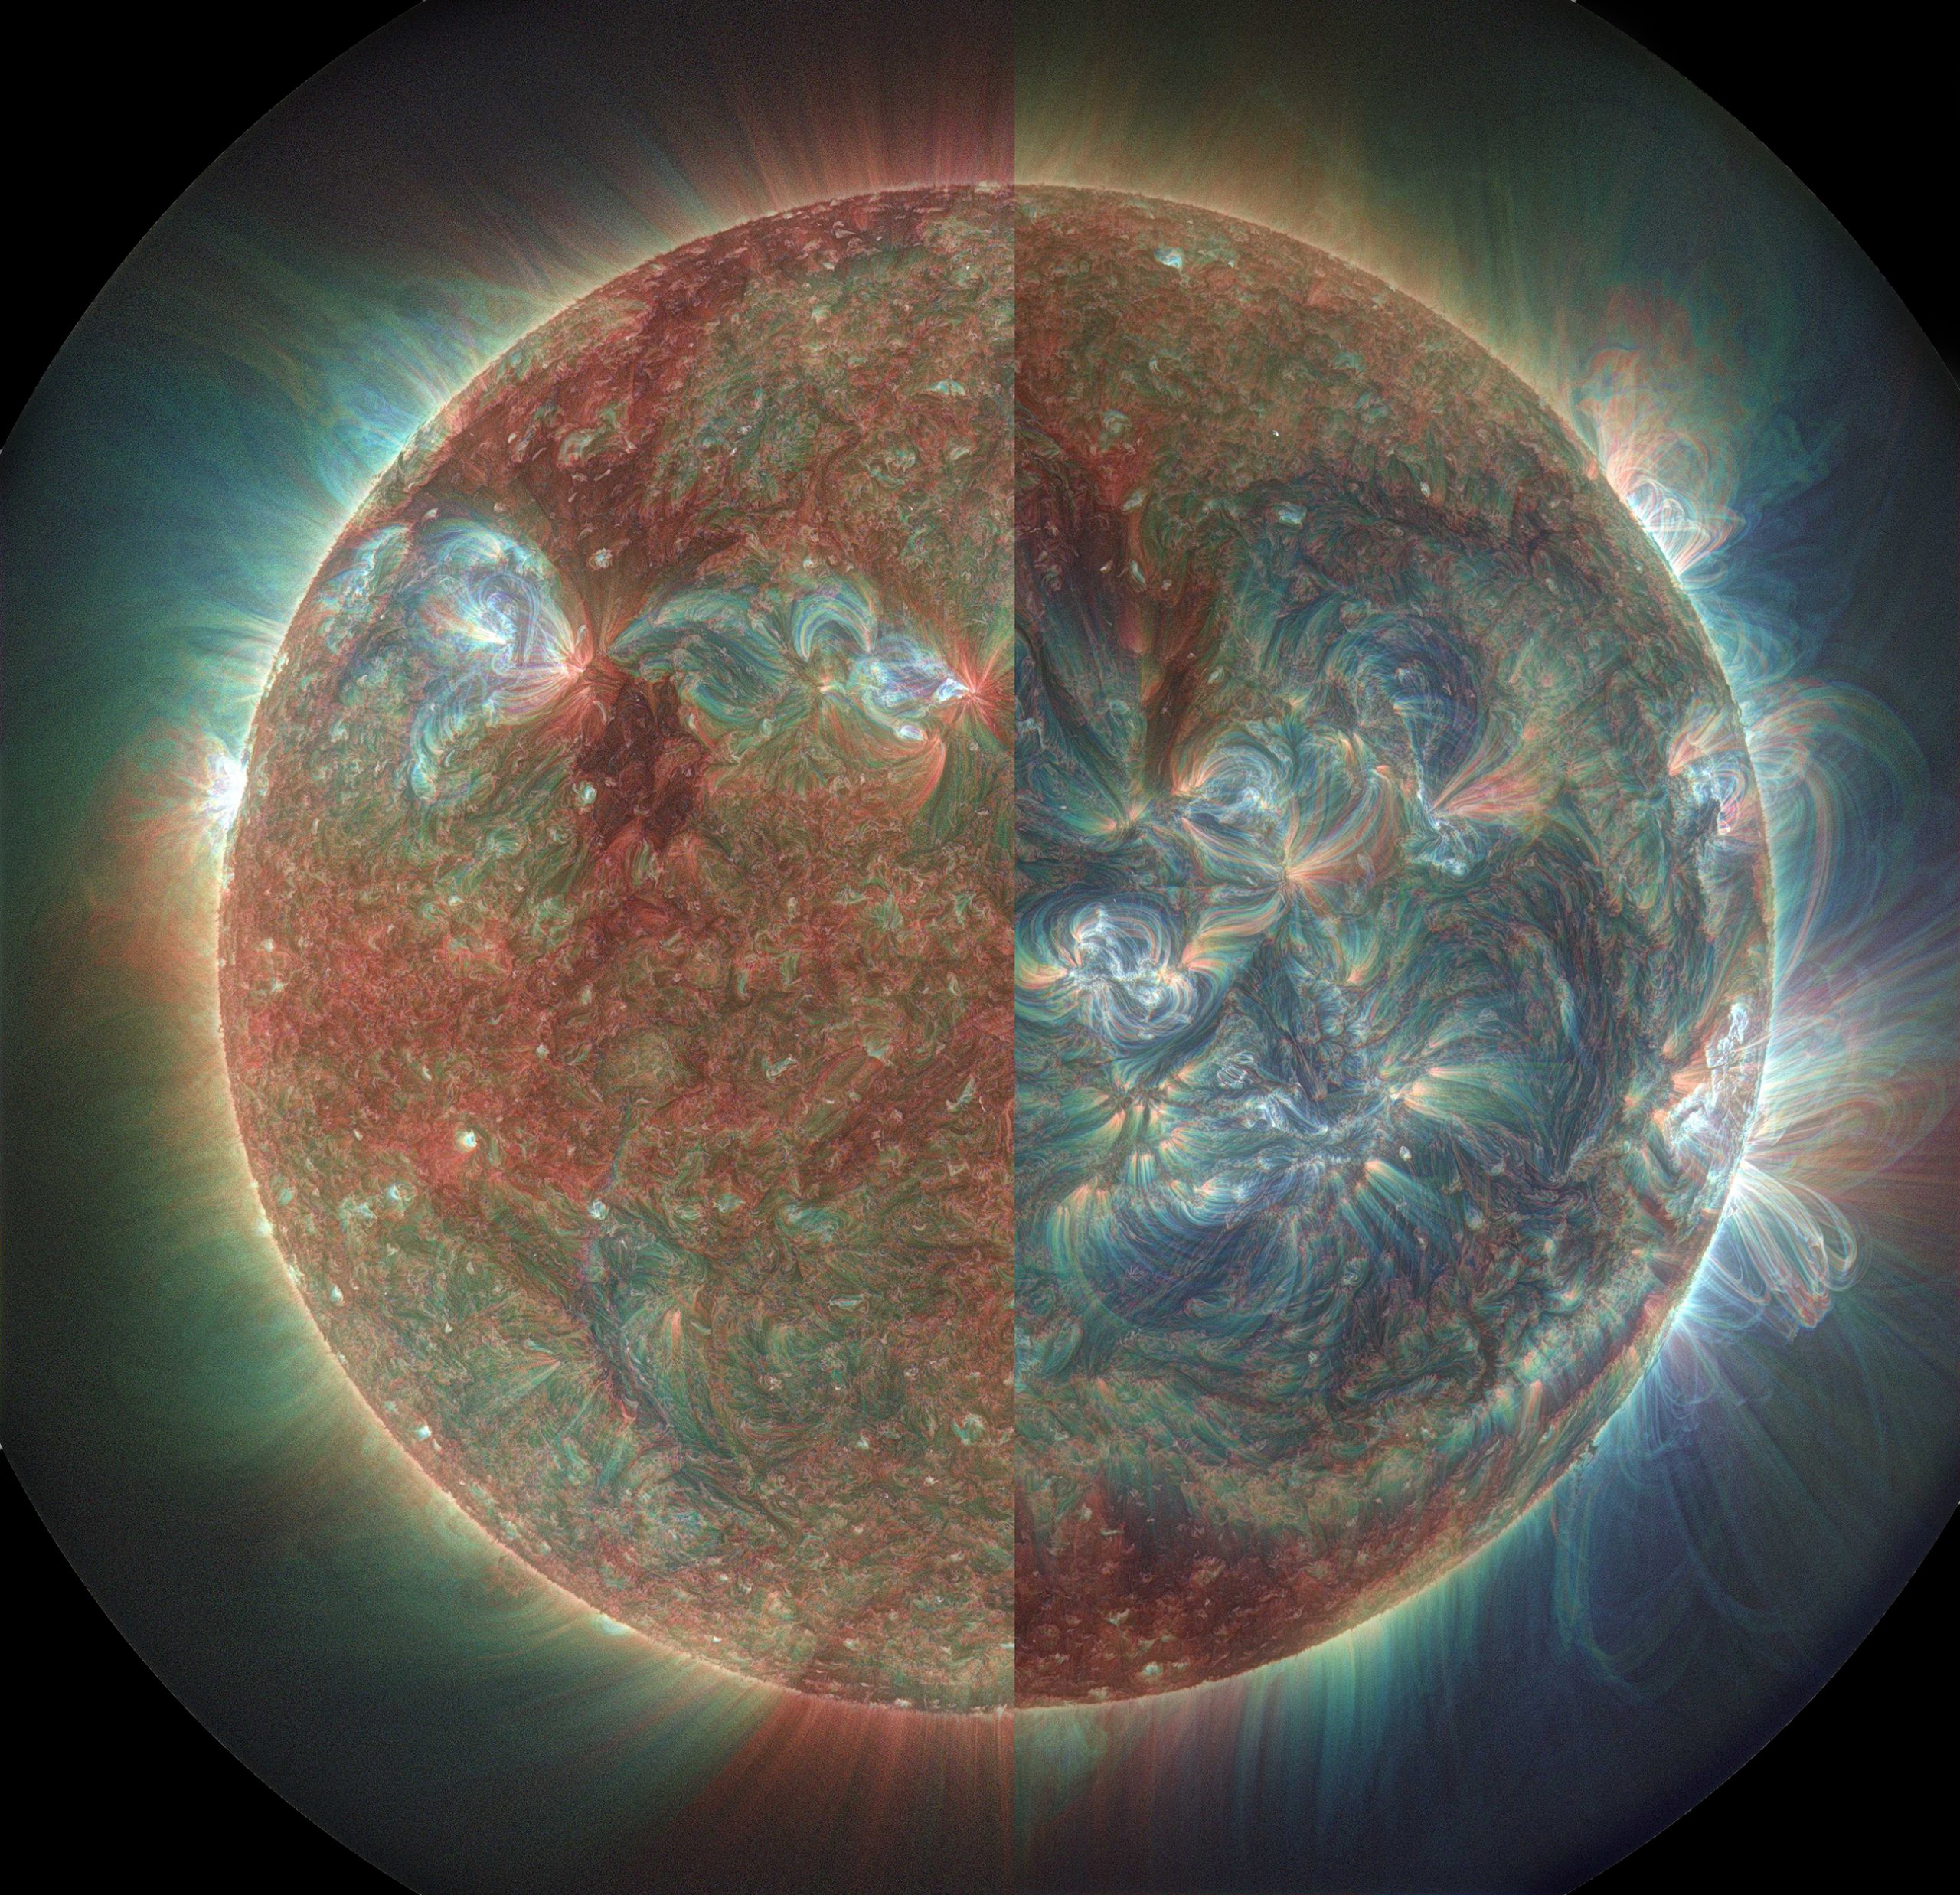 Solar cycle changes in the solar corona as viewed by atmospheric imaging assembly (aia) on the solar dynamic observatory in extreme ultraviolet (euv) toward the end of the latest solar minimum activity period in may 2010 (left half) and during the current solar maximum period in december 2014 (right half).